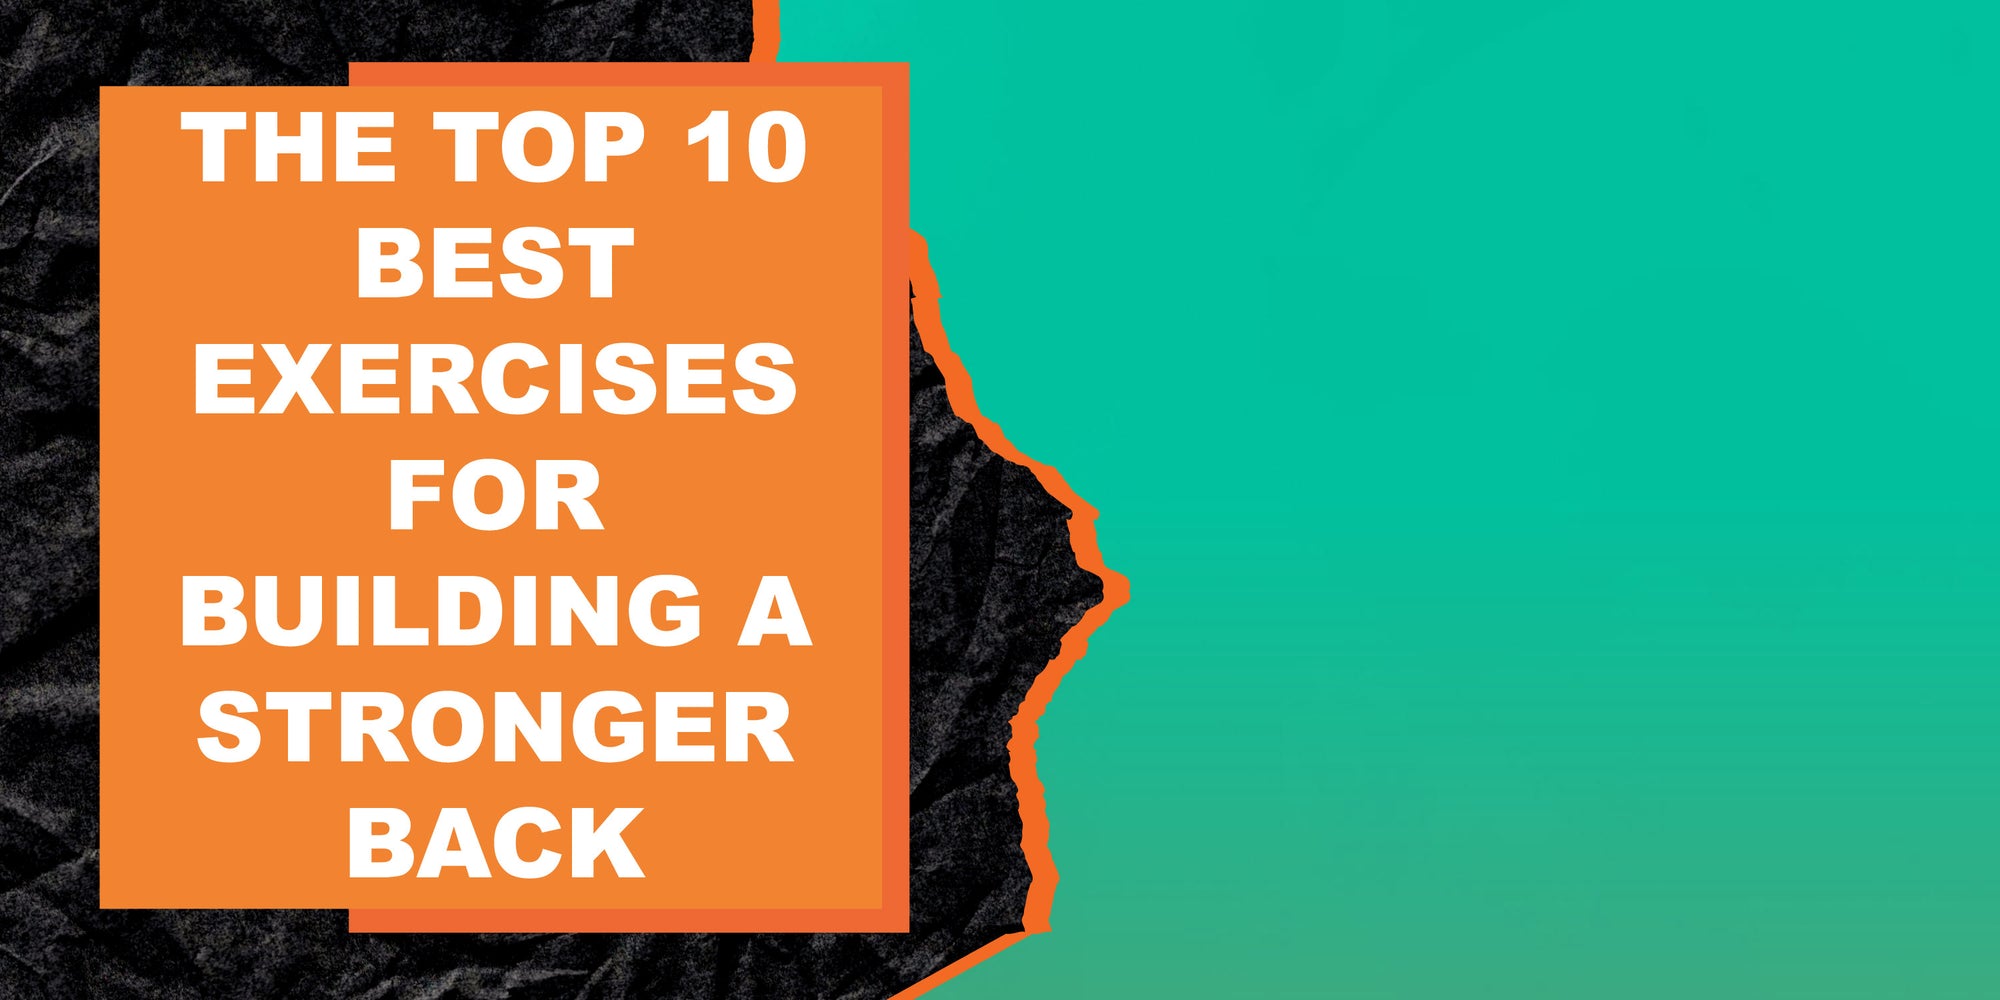 The Top 10 Best Exercises for Building a Stronger Back